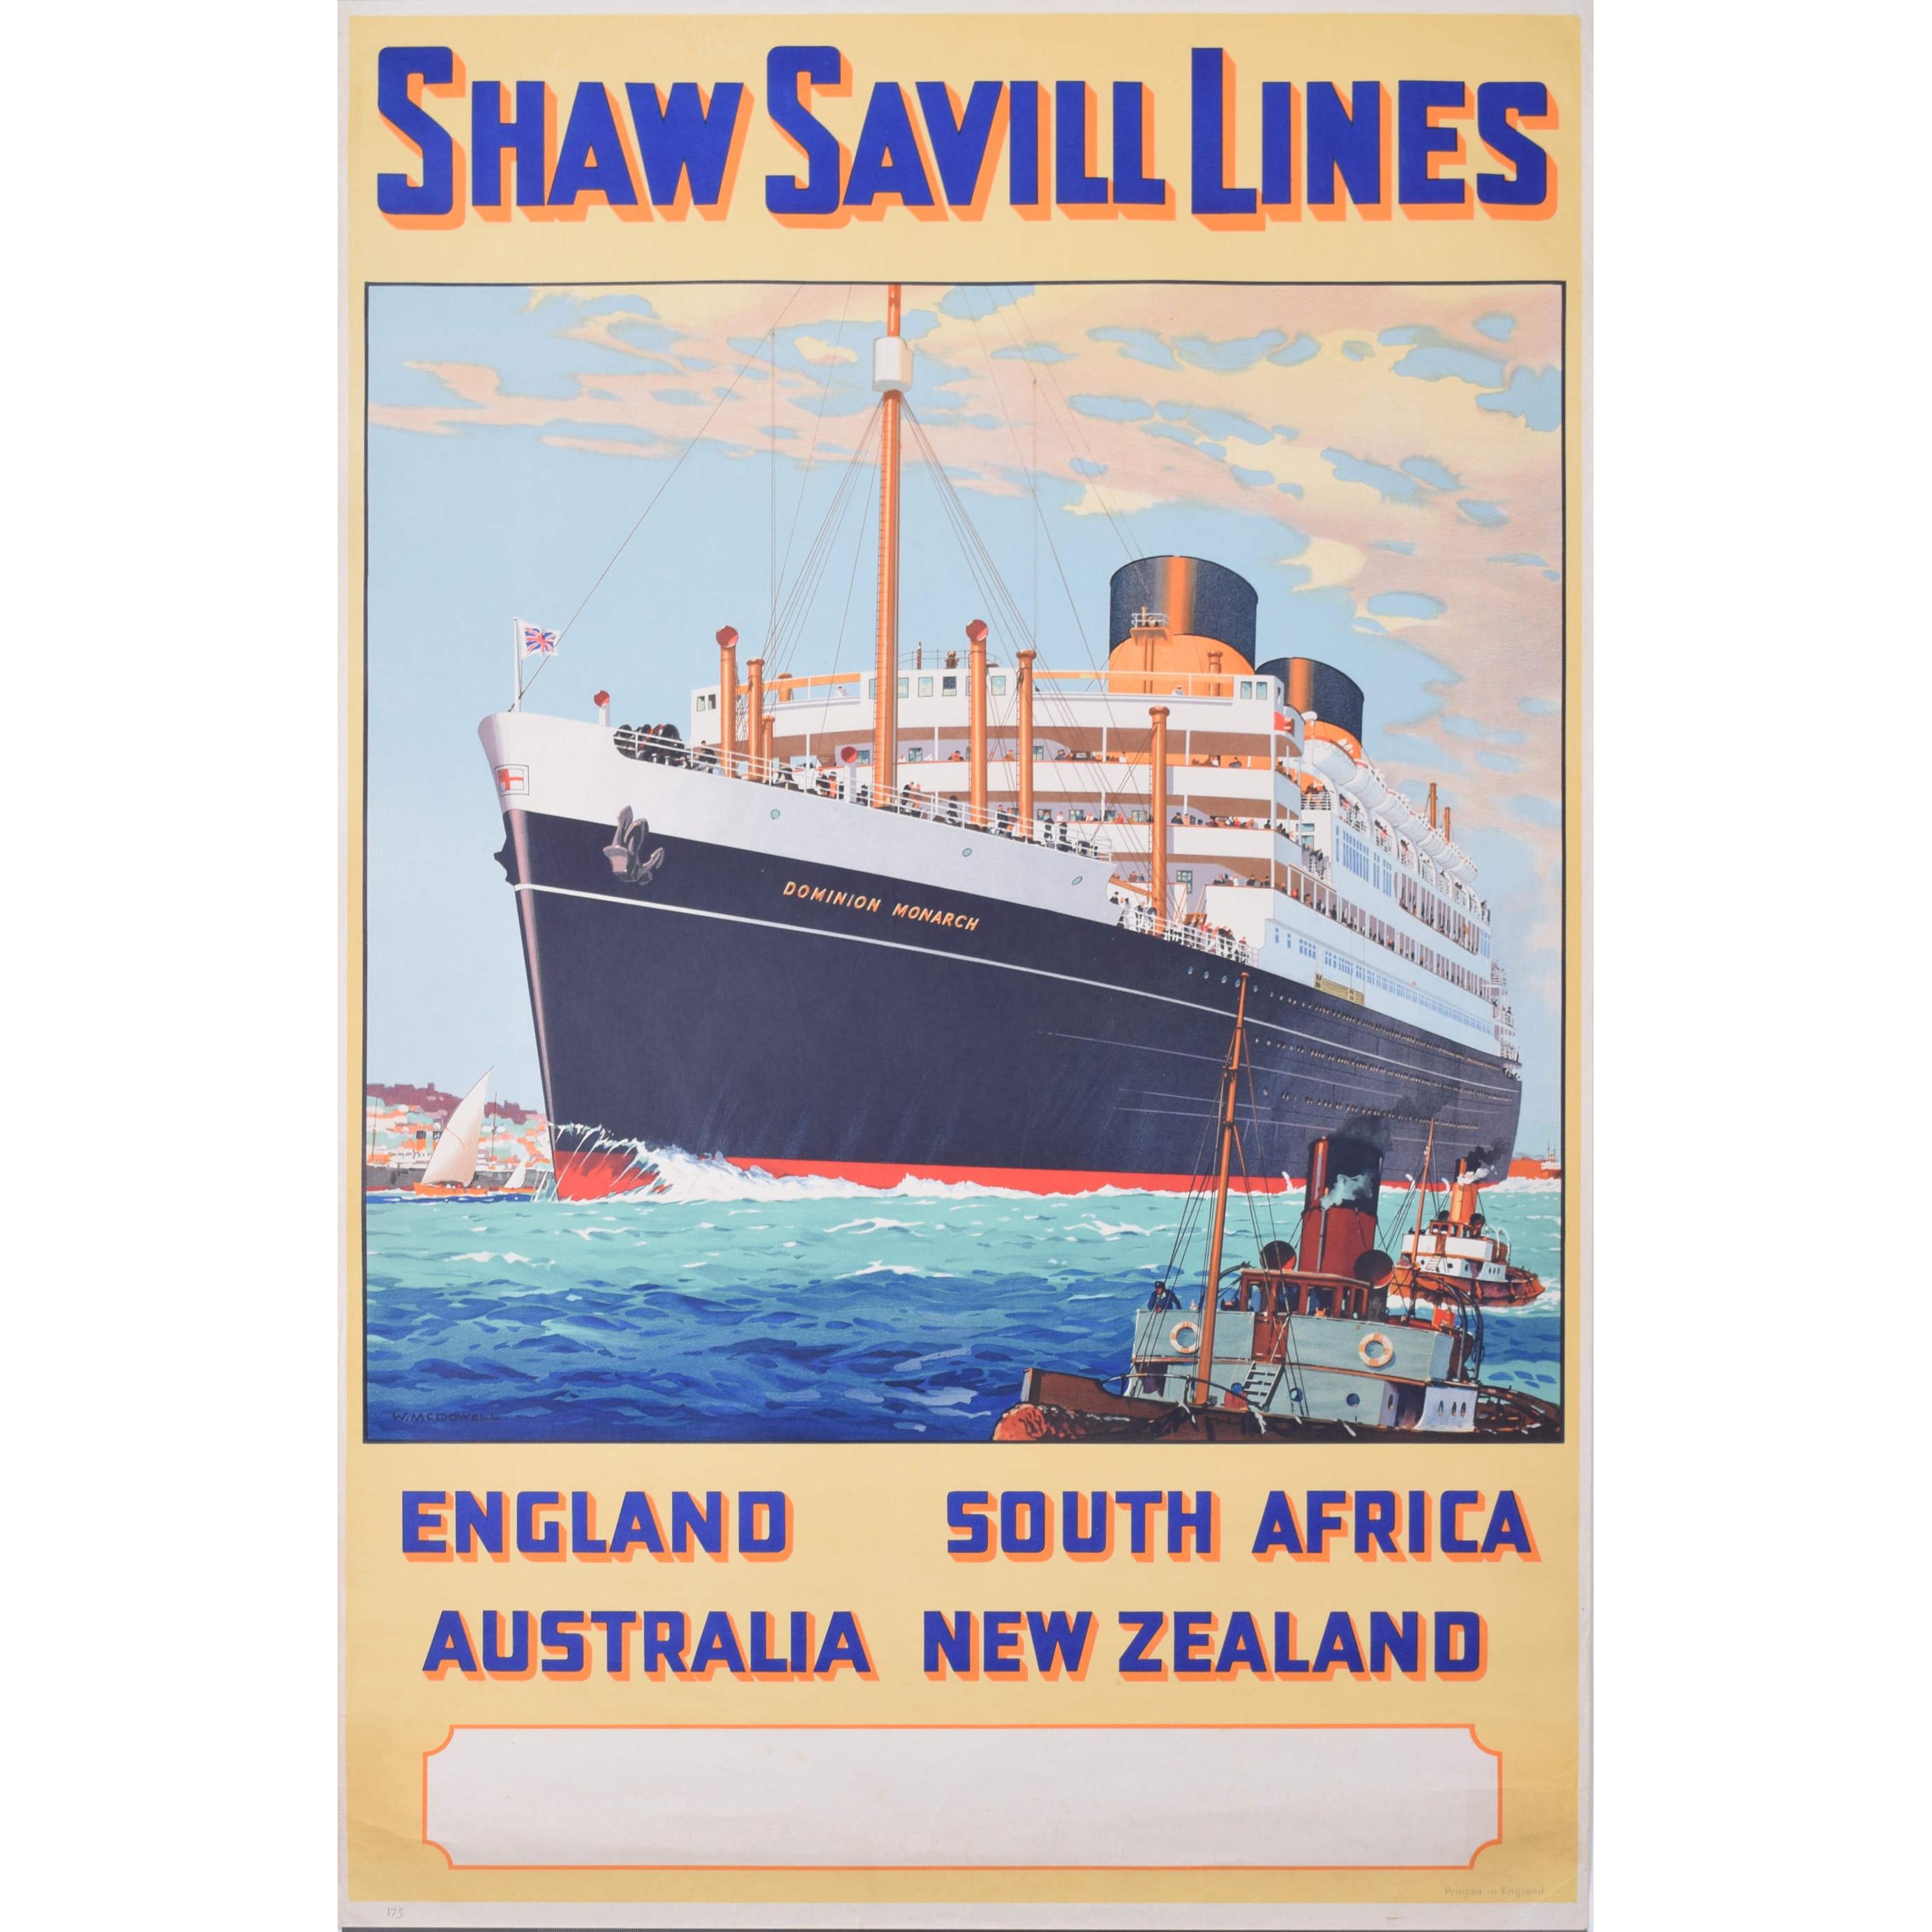 Shaw Savill Lines - Dominion Monarch original vintage poster by William McDowell For Sale 4